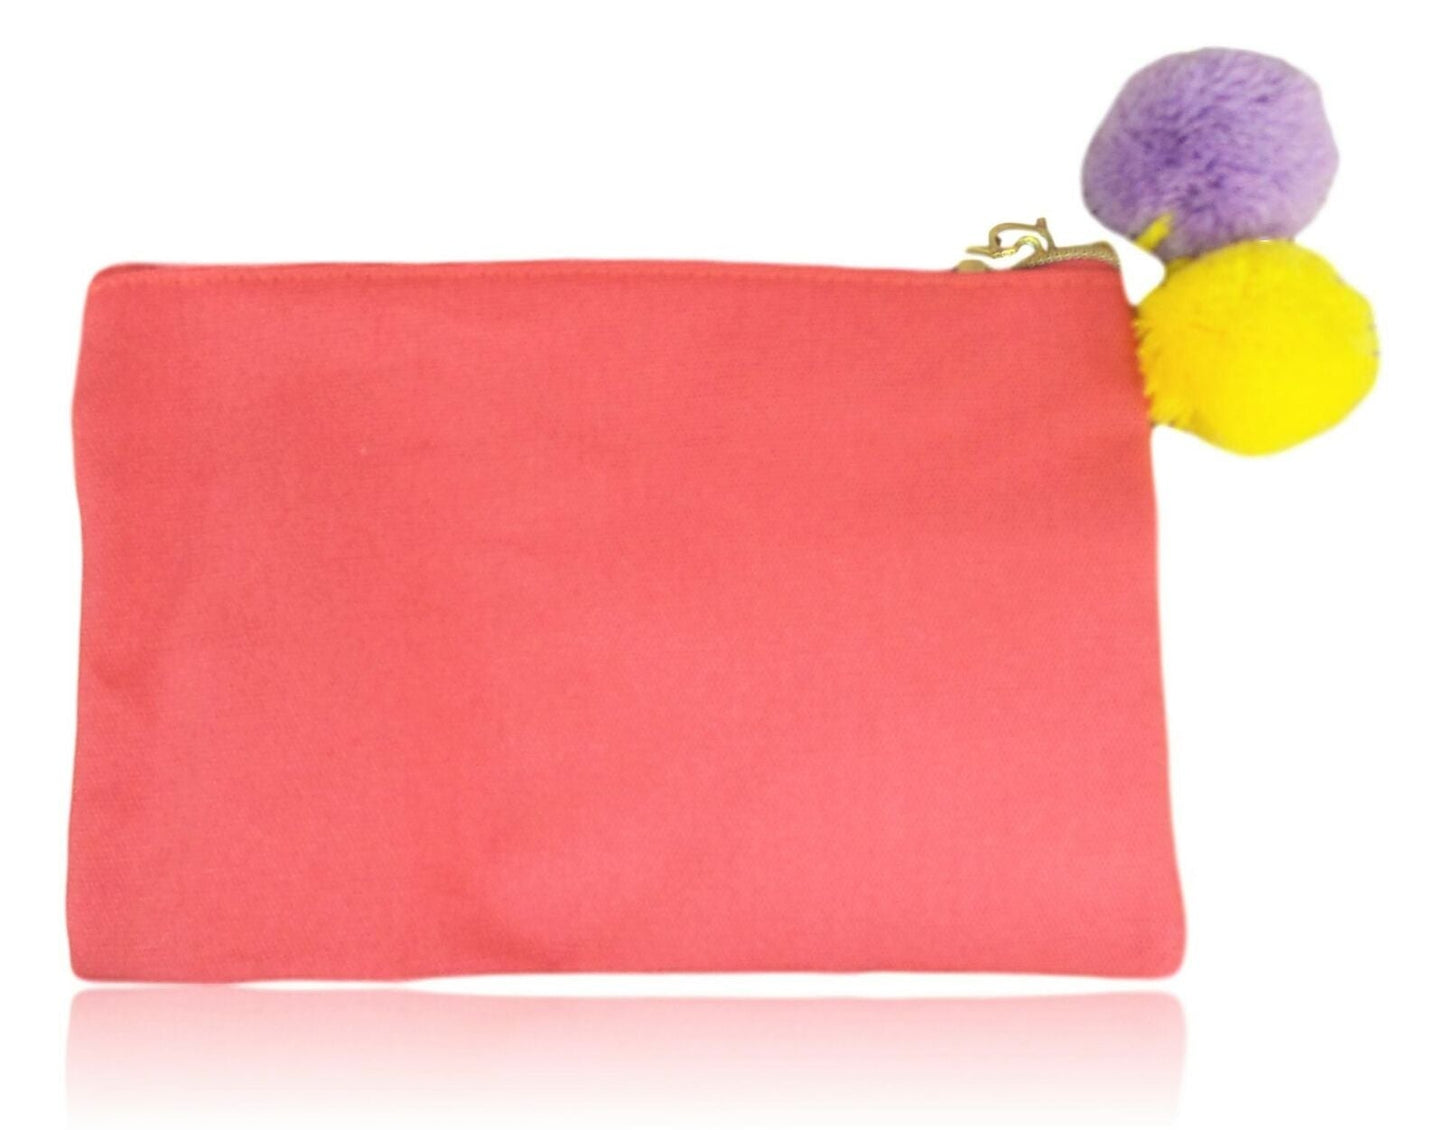 tarte Never Not Busy Makeup Cosmetics Bag Pink with pompoms & top zip.